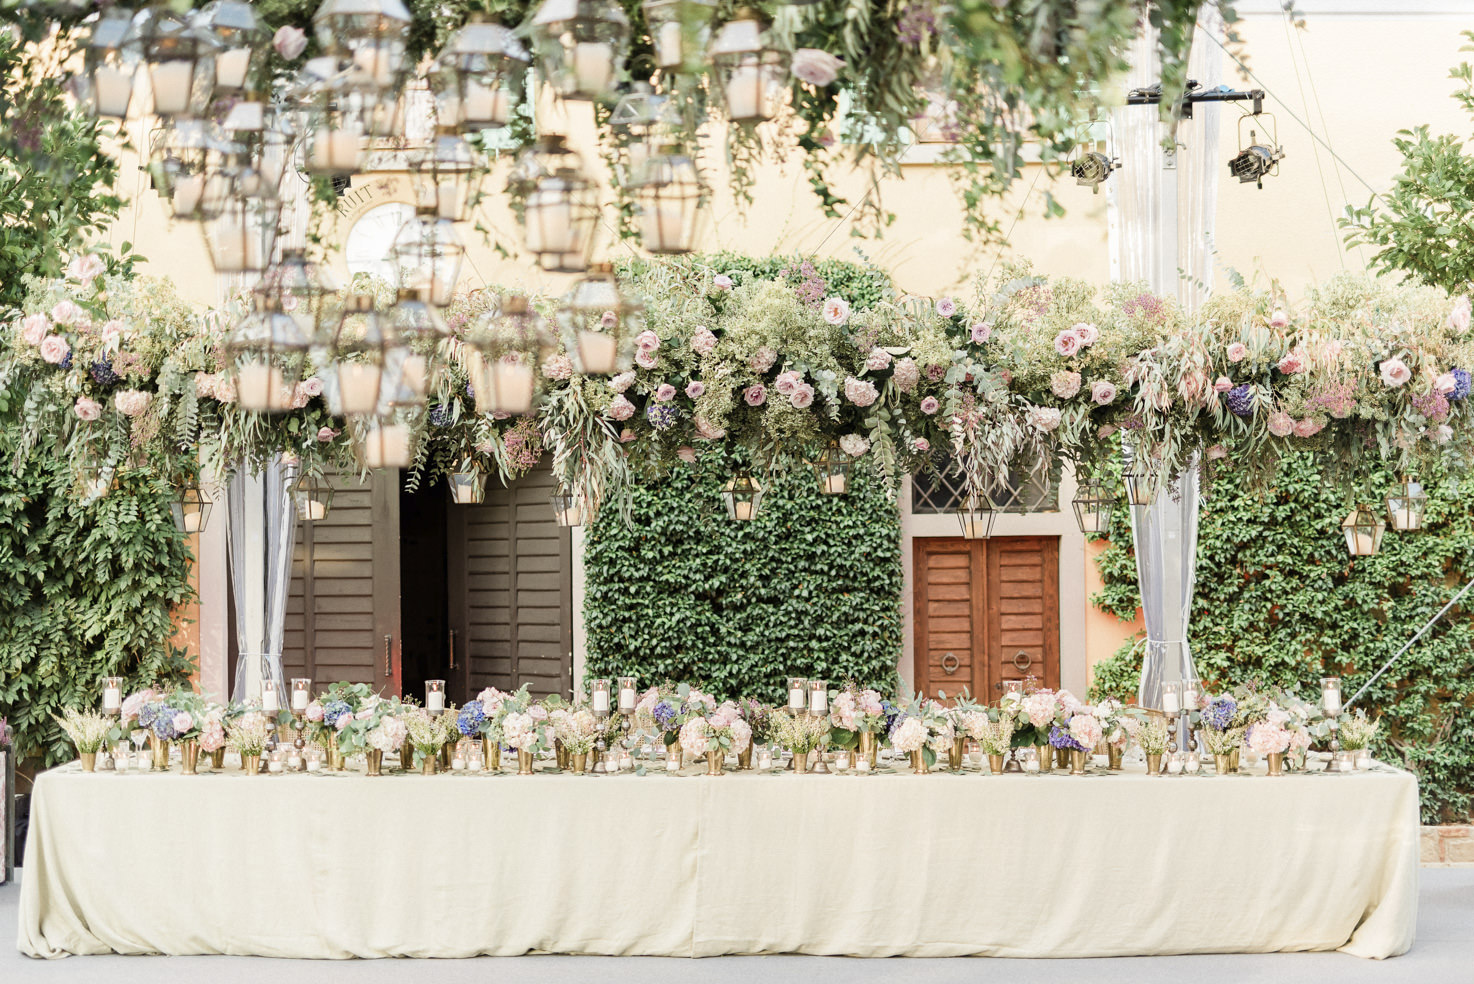 Top table for wedding reception in Tuscany